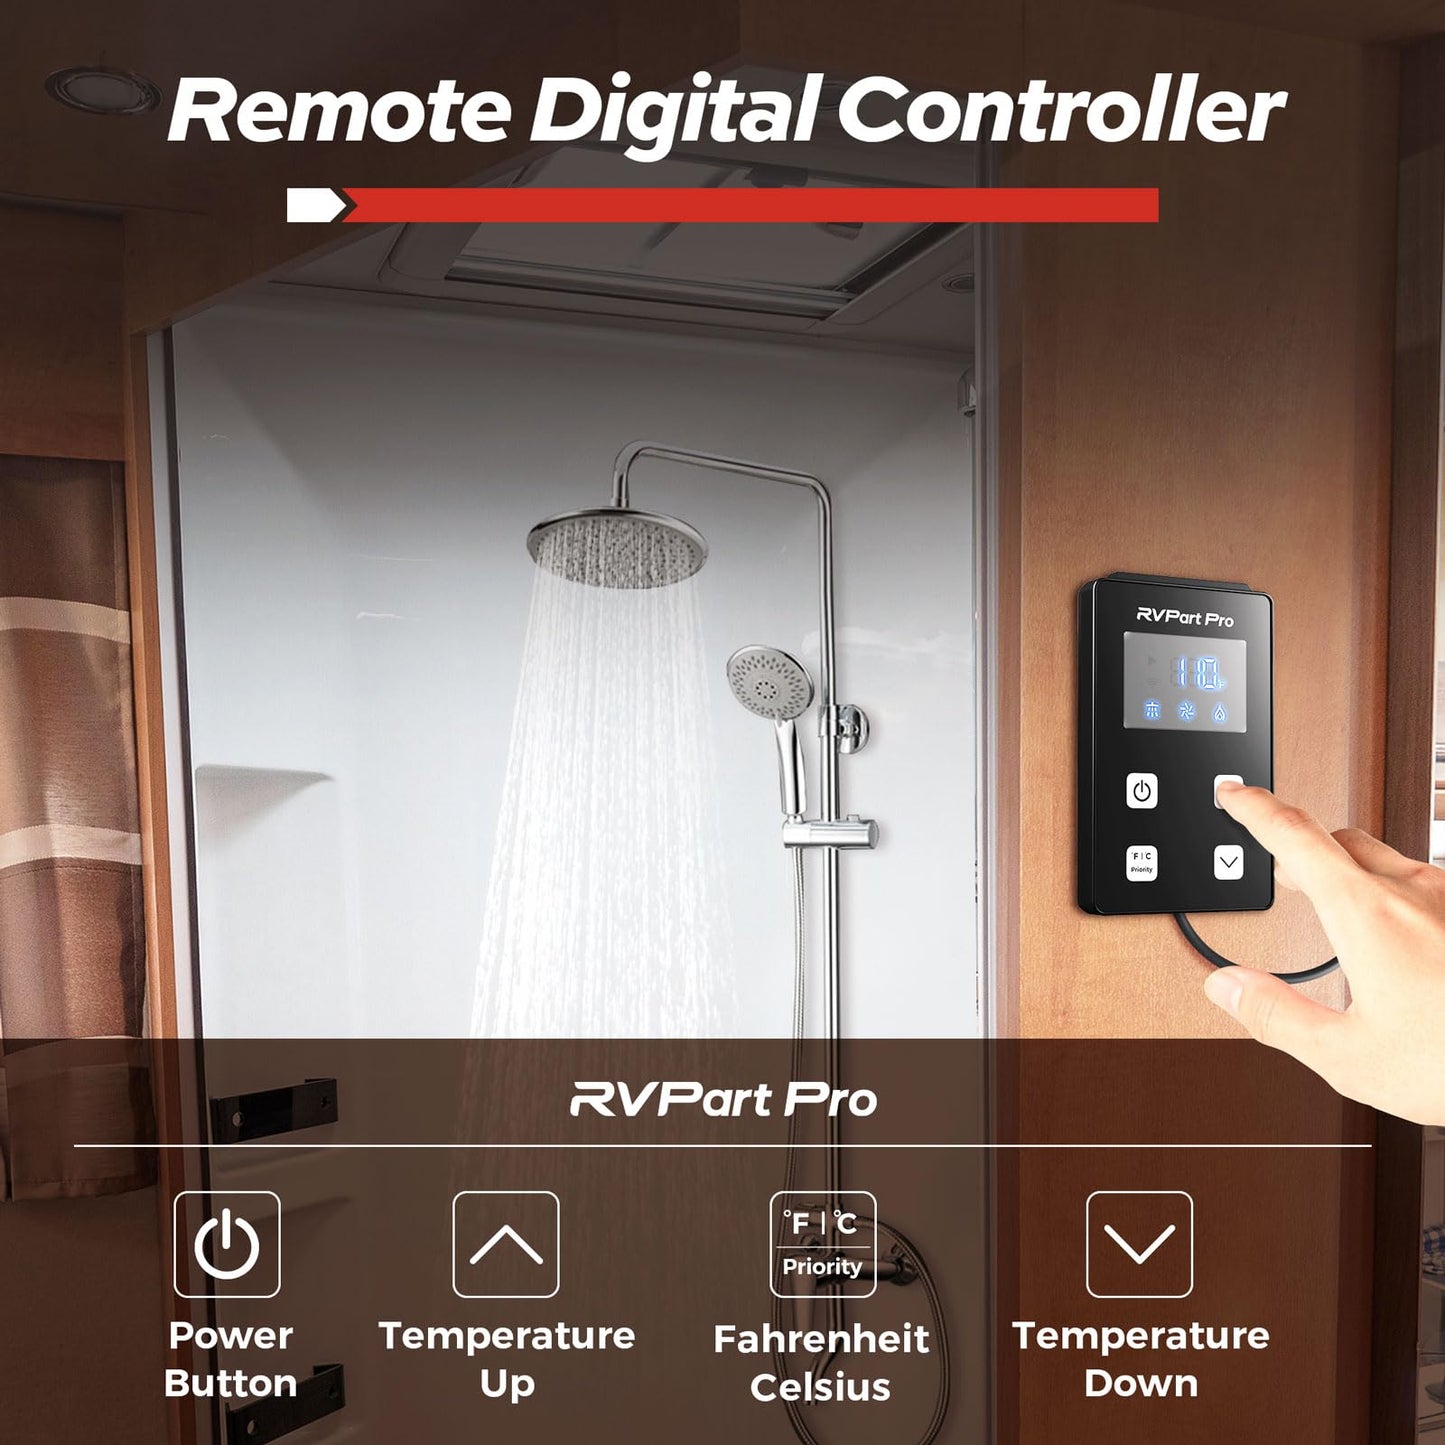 RVPart Pro RV Tankless Water Heater - 42,000 BTU with 2.2 GPM of Hot Water - White Door and Remote Controller Included -Endless Hot water for Summer Comfort Performance